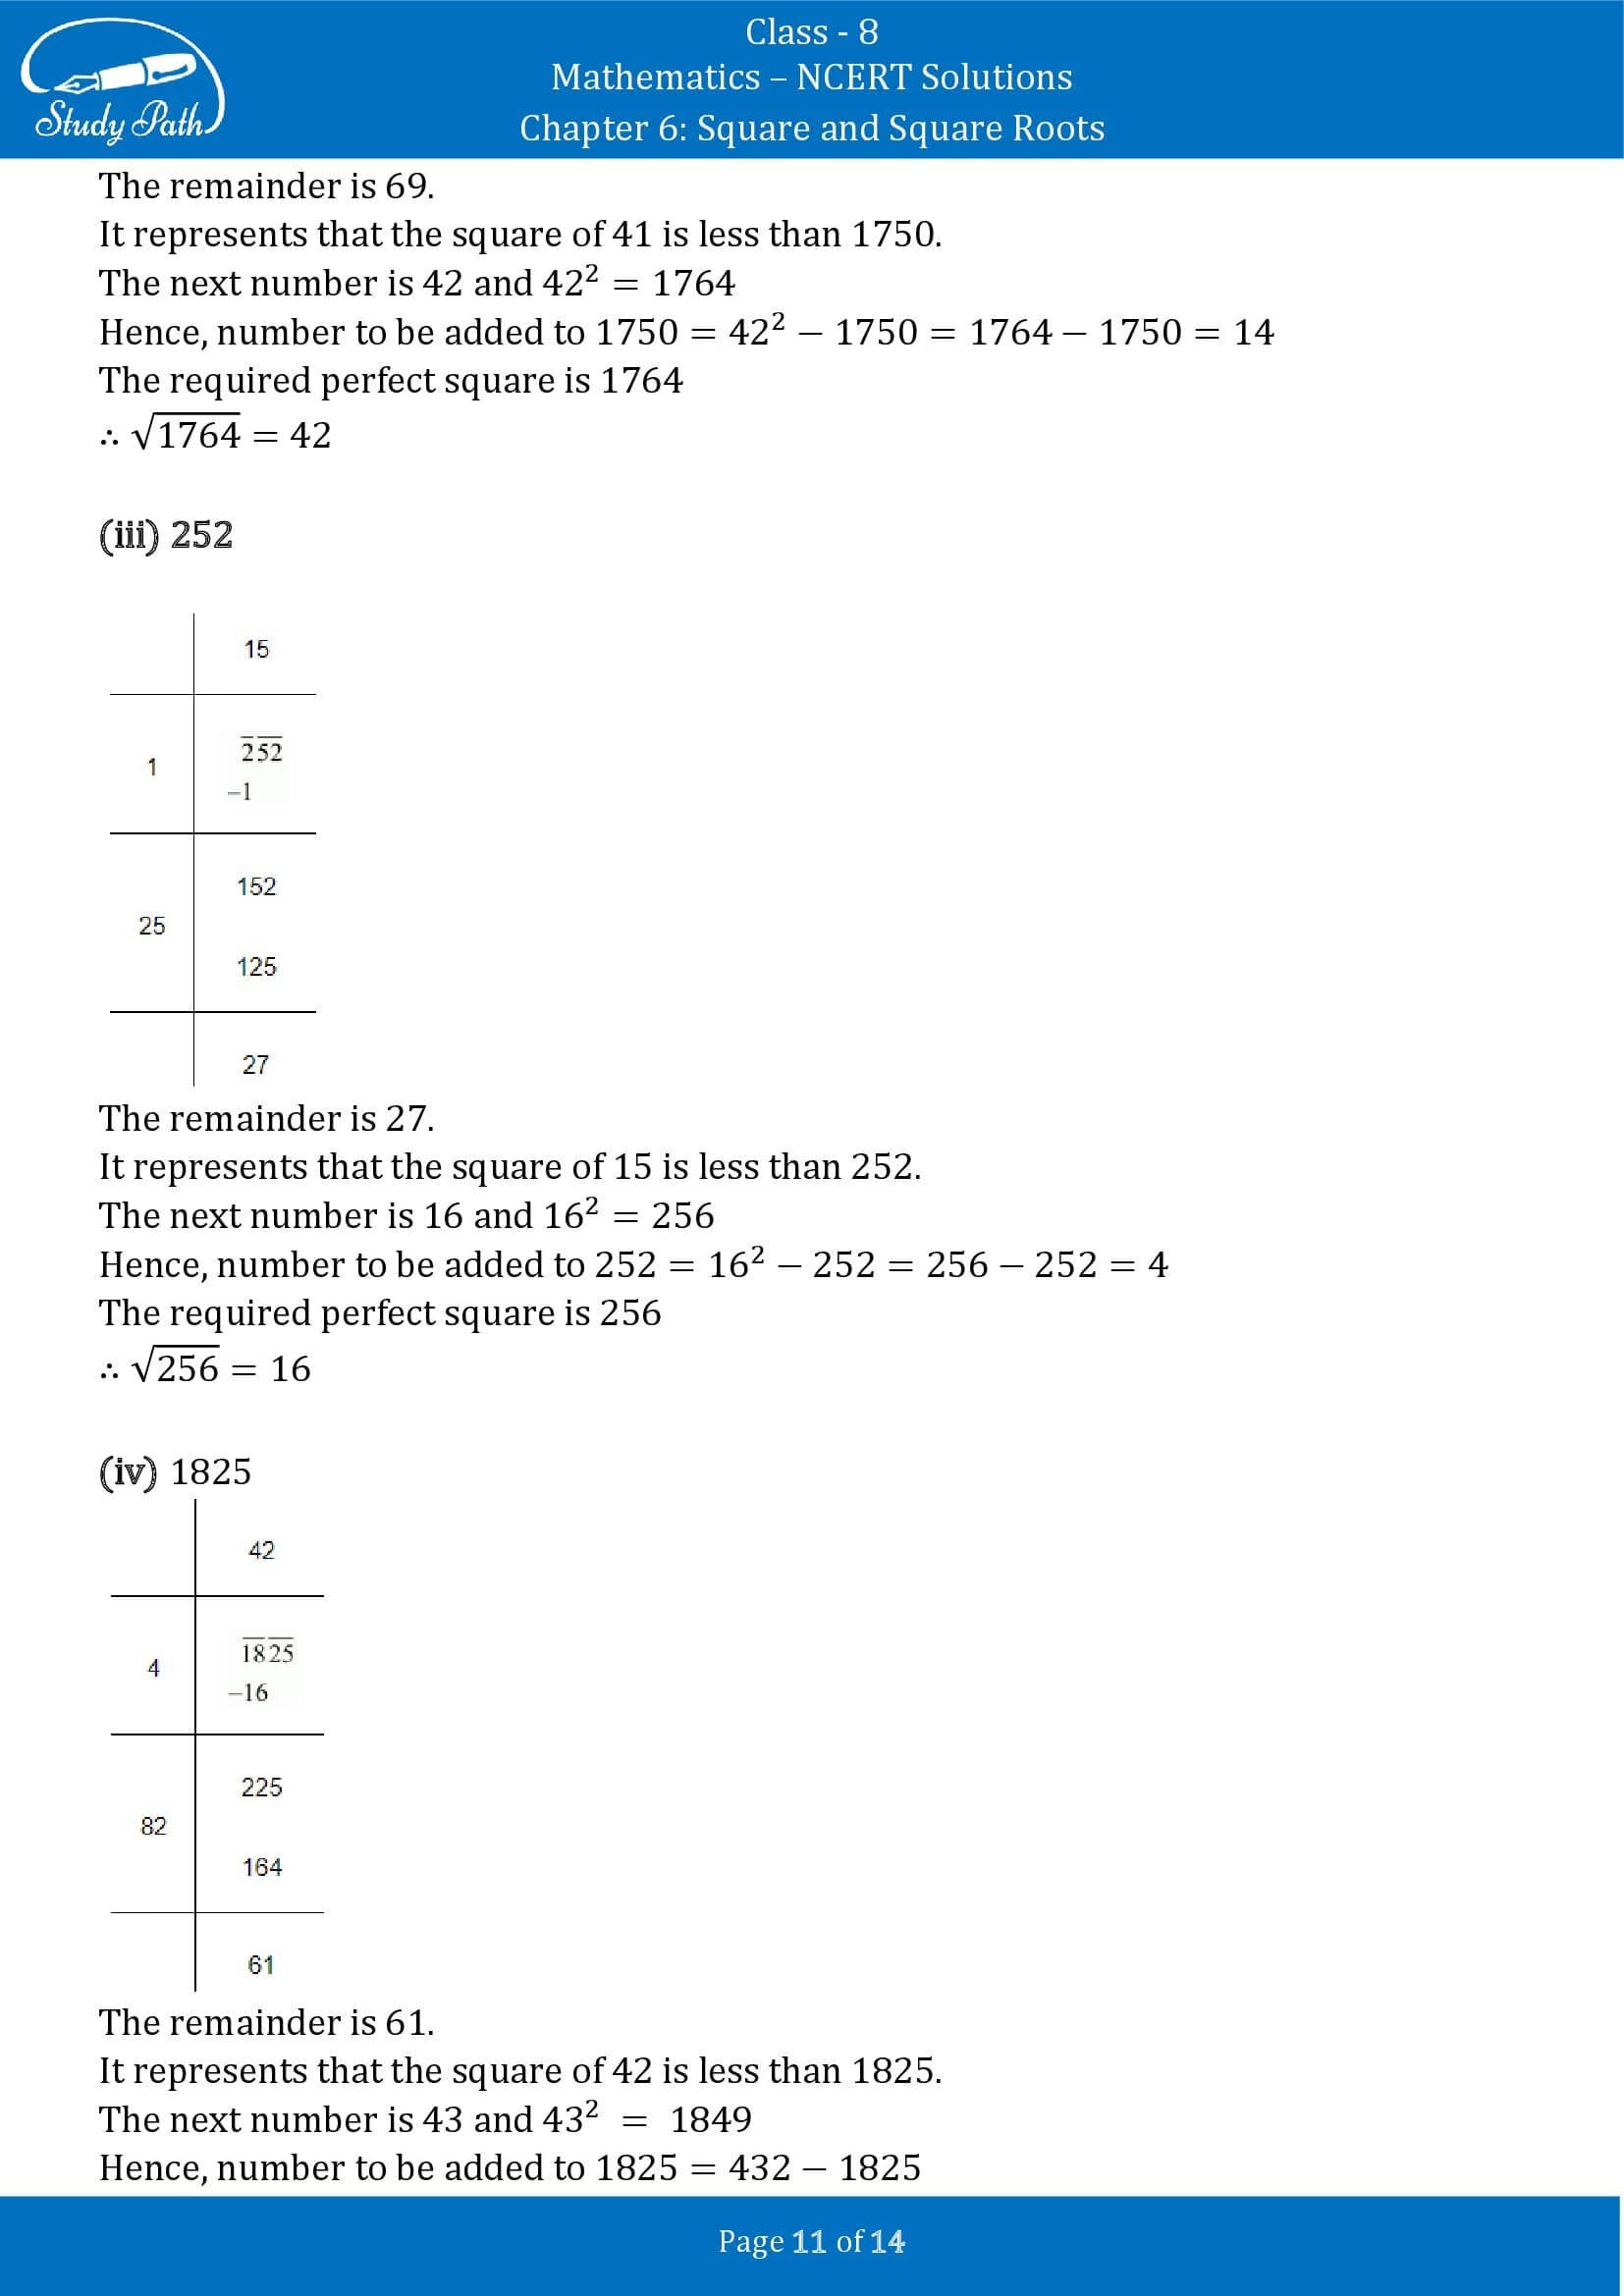 NCERT Solutions for Class 8 Maths Chapter 6 Square and Square Roots Exercise 6.4 00011